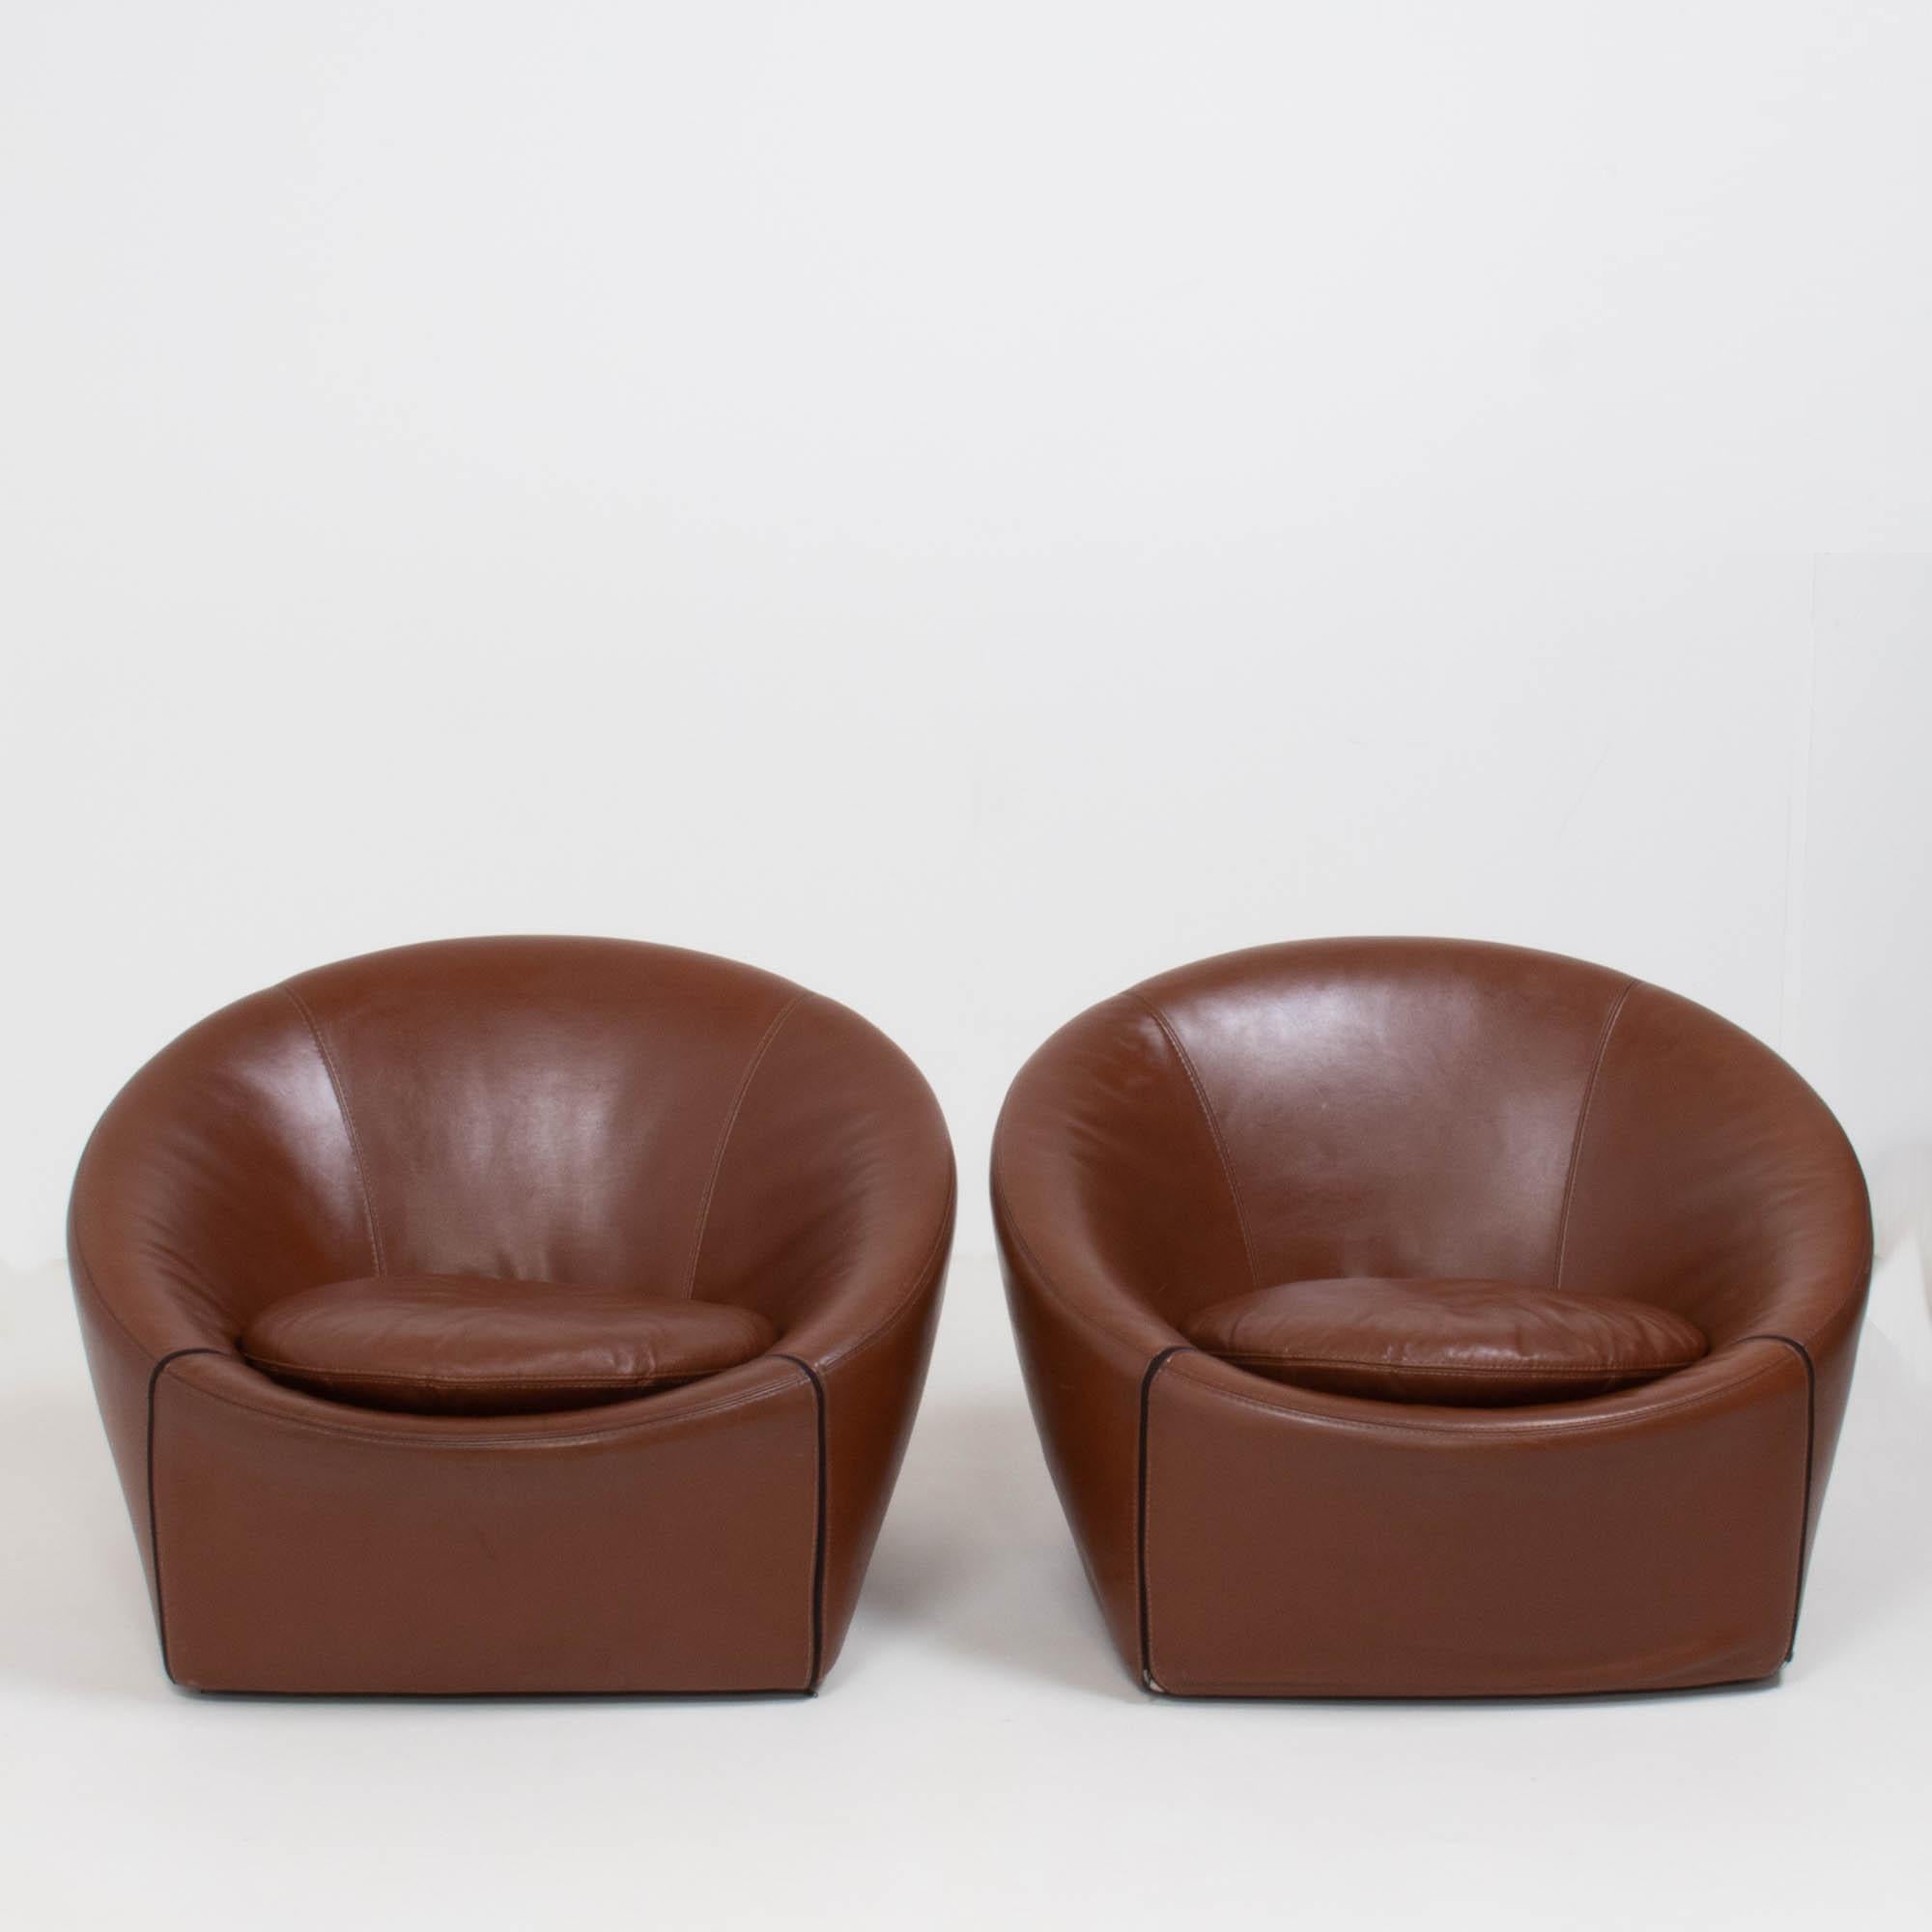 Designed by Gordon Guillaumier for Minotti in 2005, the Capri chair perfectly balances style and comfort.

The tub style chairs are fully upholstered in brown leather and the covers can be removed with the exposed zip detailing.

A separate